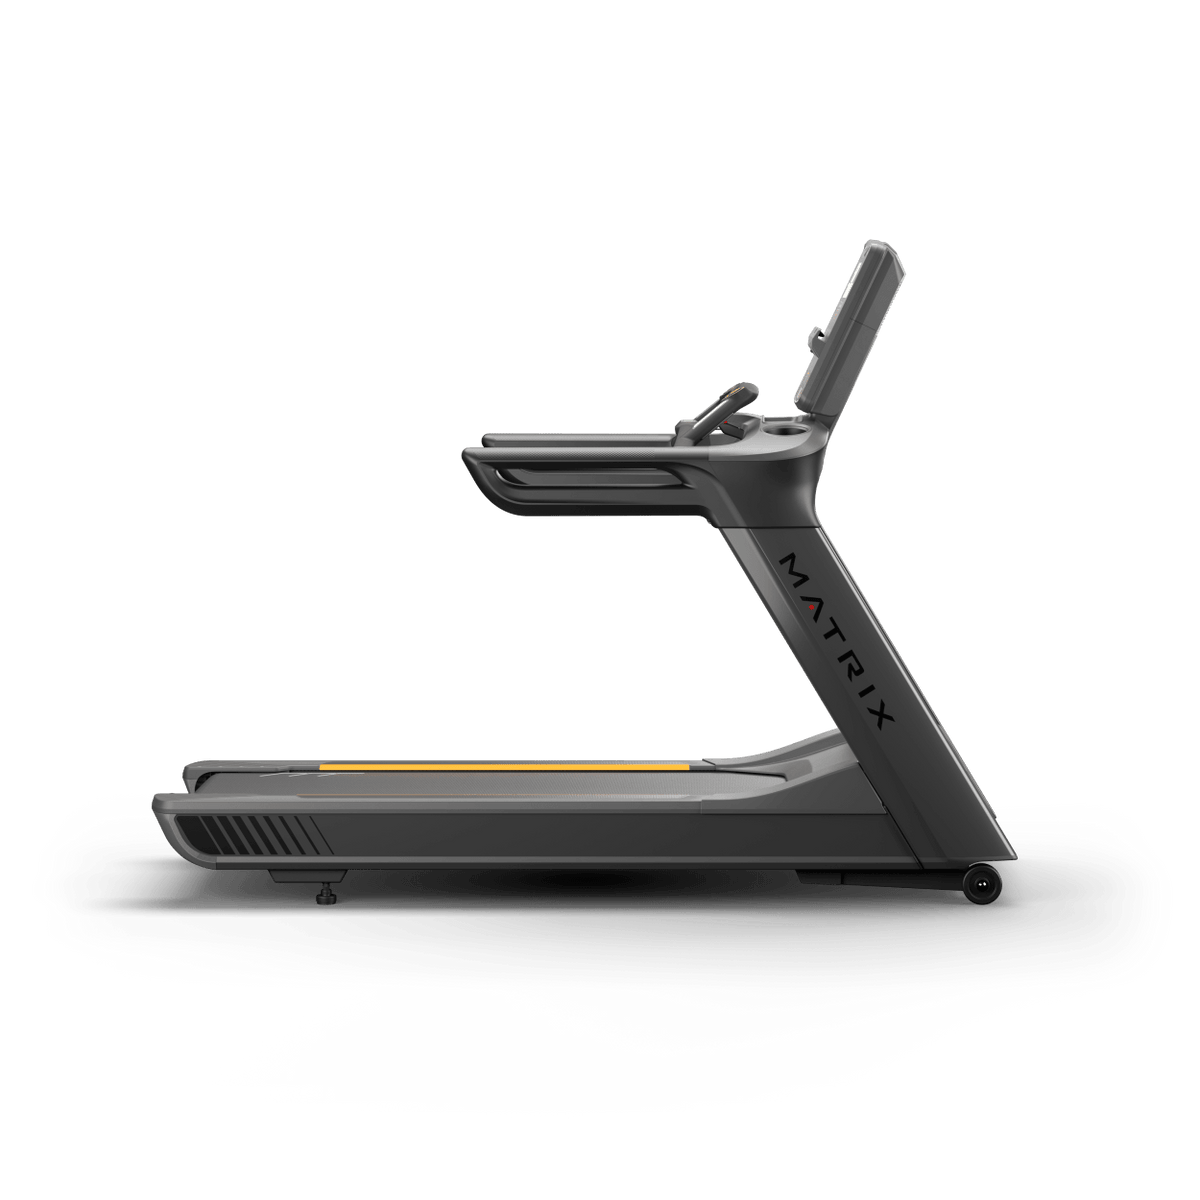 Matrix Performance Treadmill with Premium LED Console side view | Fitness Experience